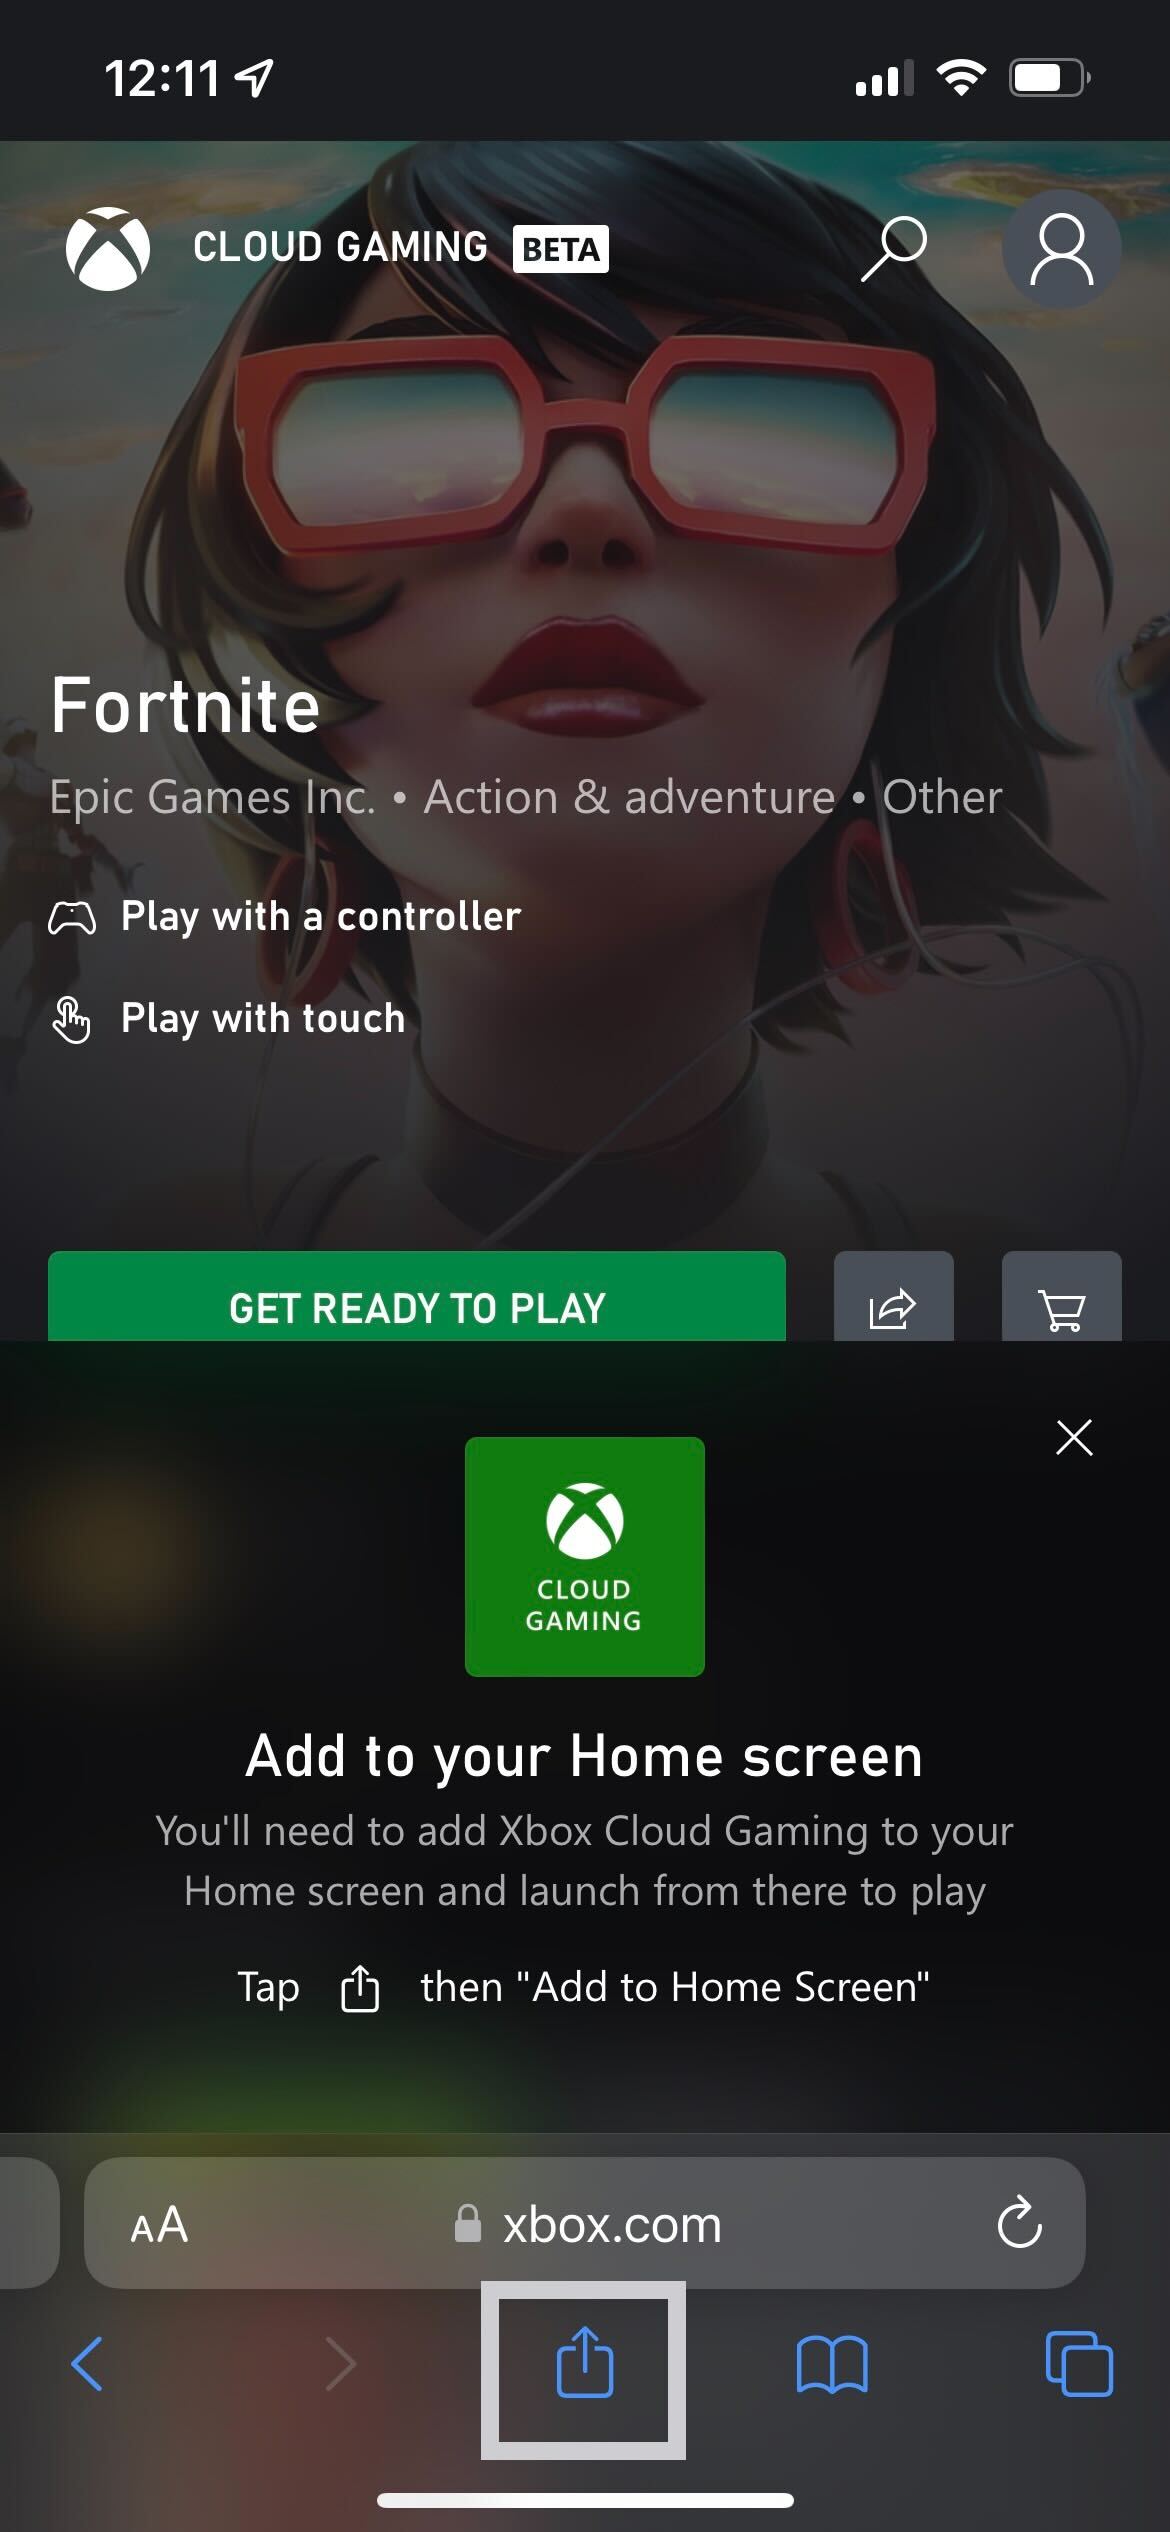 Adds xbox to home screen on iOS